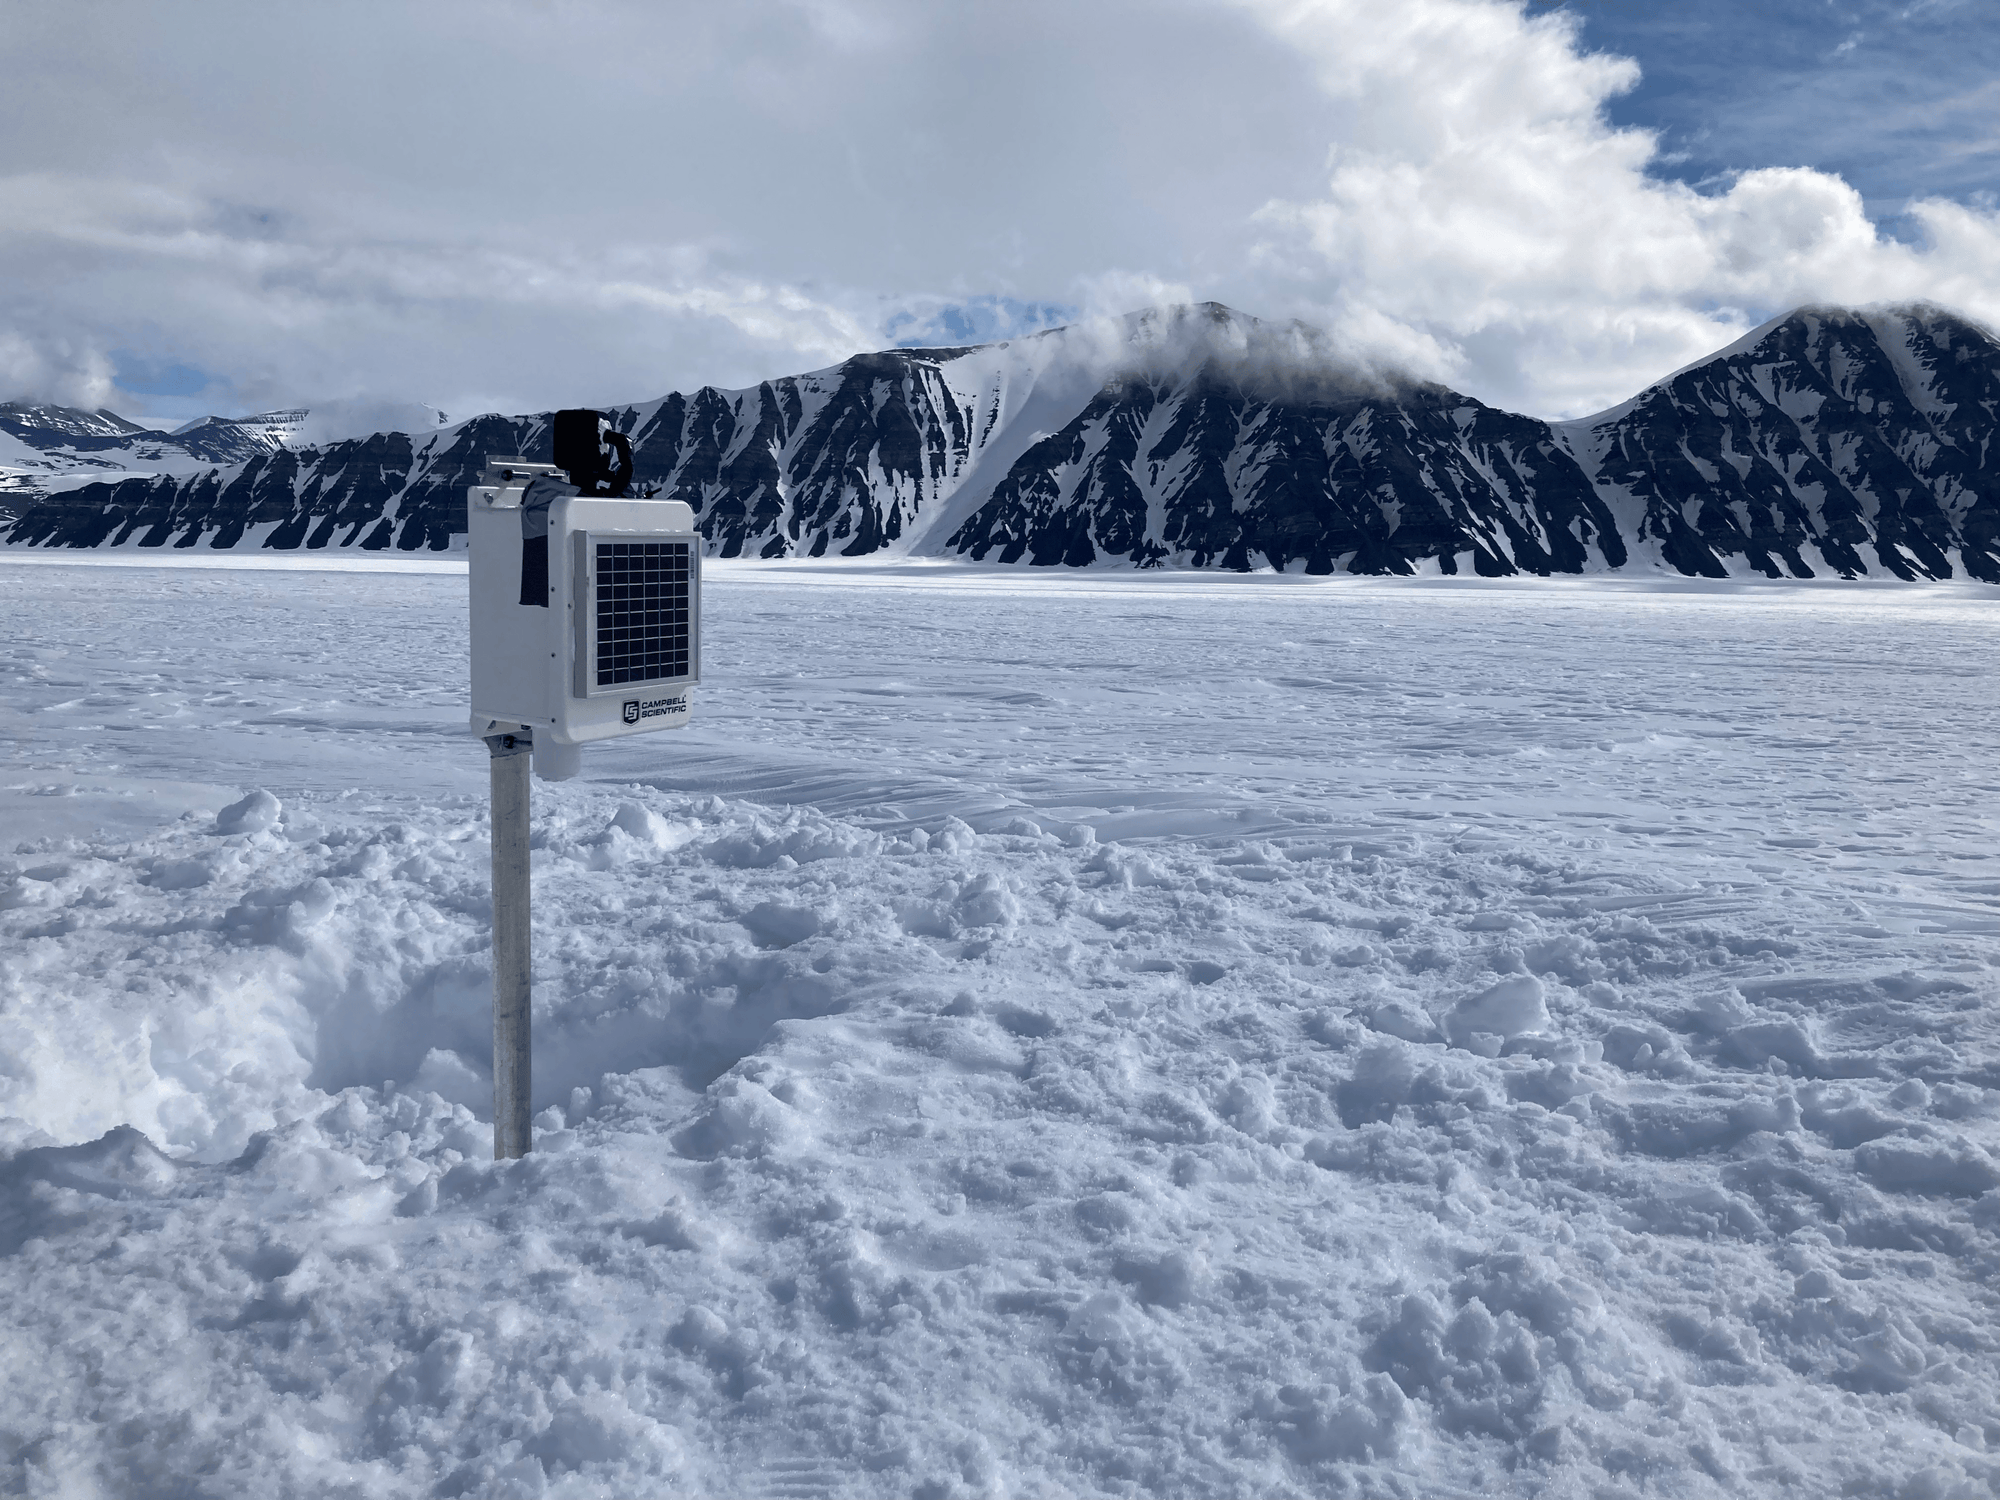 CamDo Construction Cameras Provide Eyes on Climate Change Effects on the Antarctic Peninsula